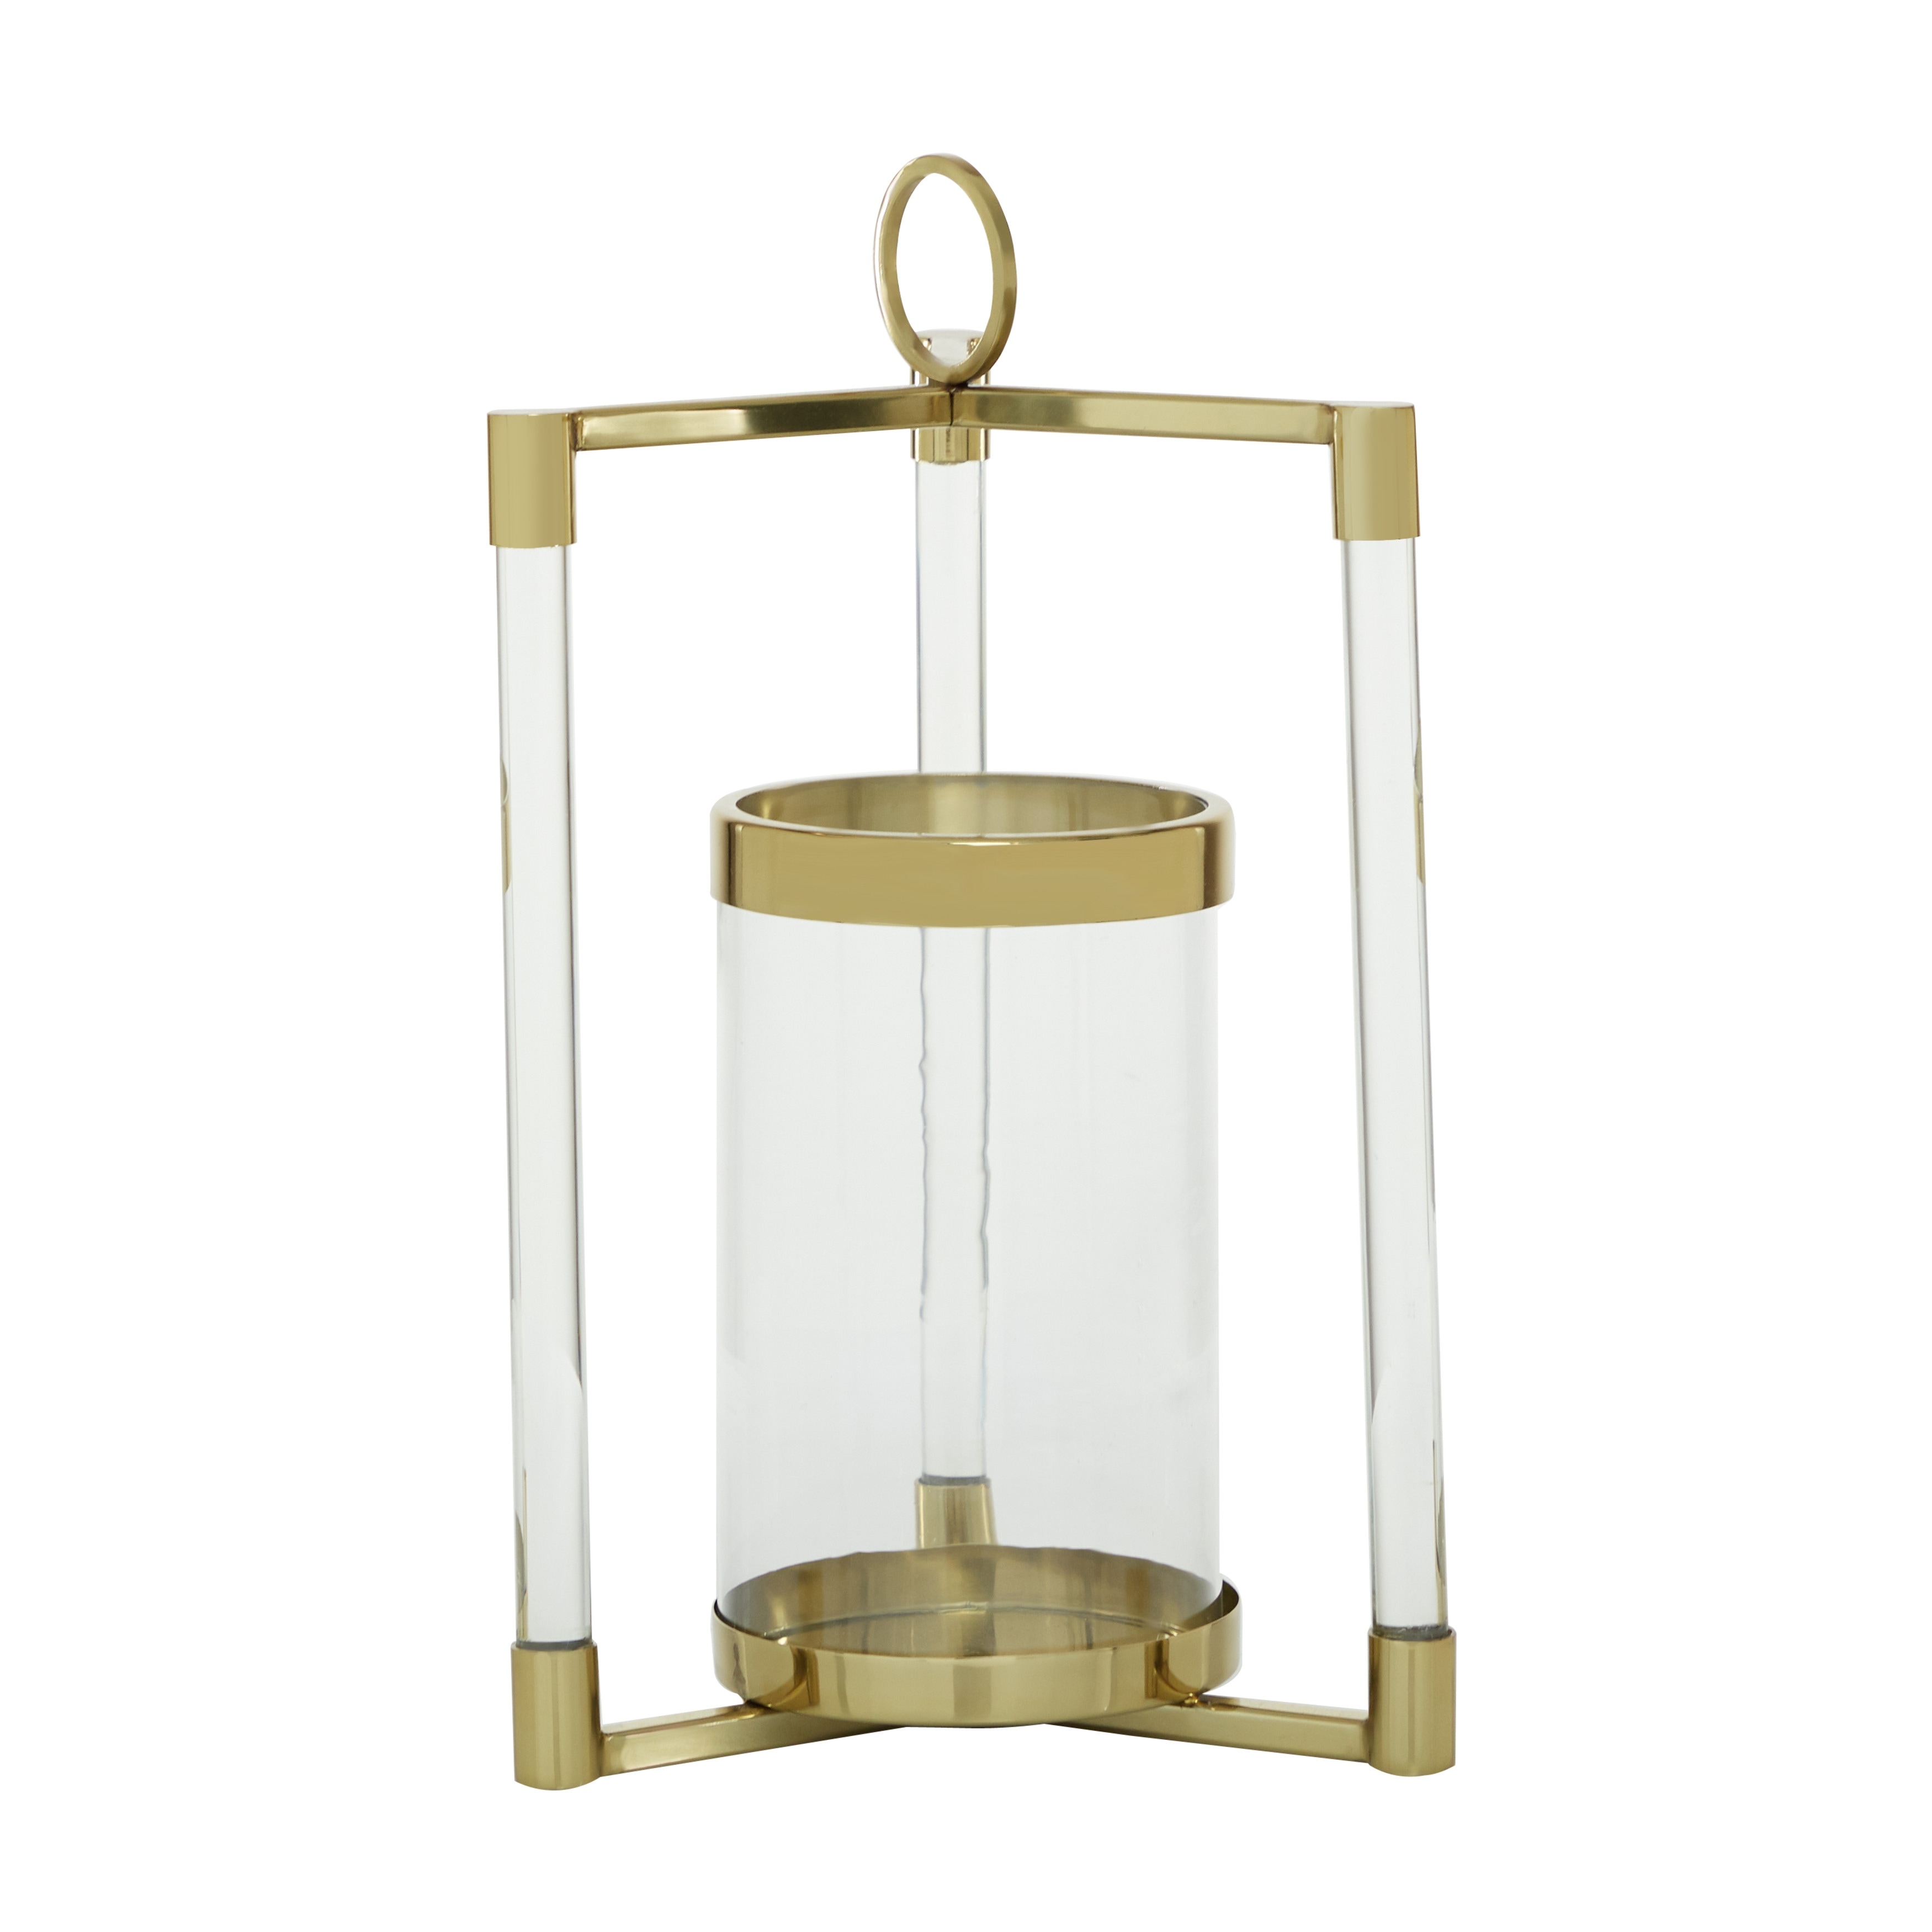 The Novogratz Gold Stainless Steel Pillar Candle Lantern with Acrylic Accents - 11 x 11 x 18